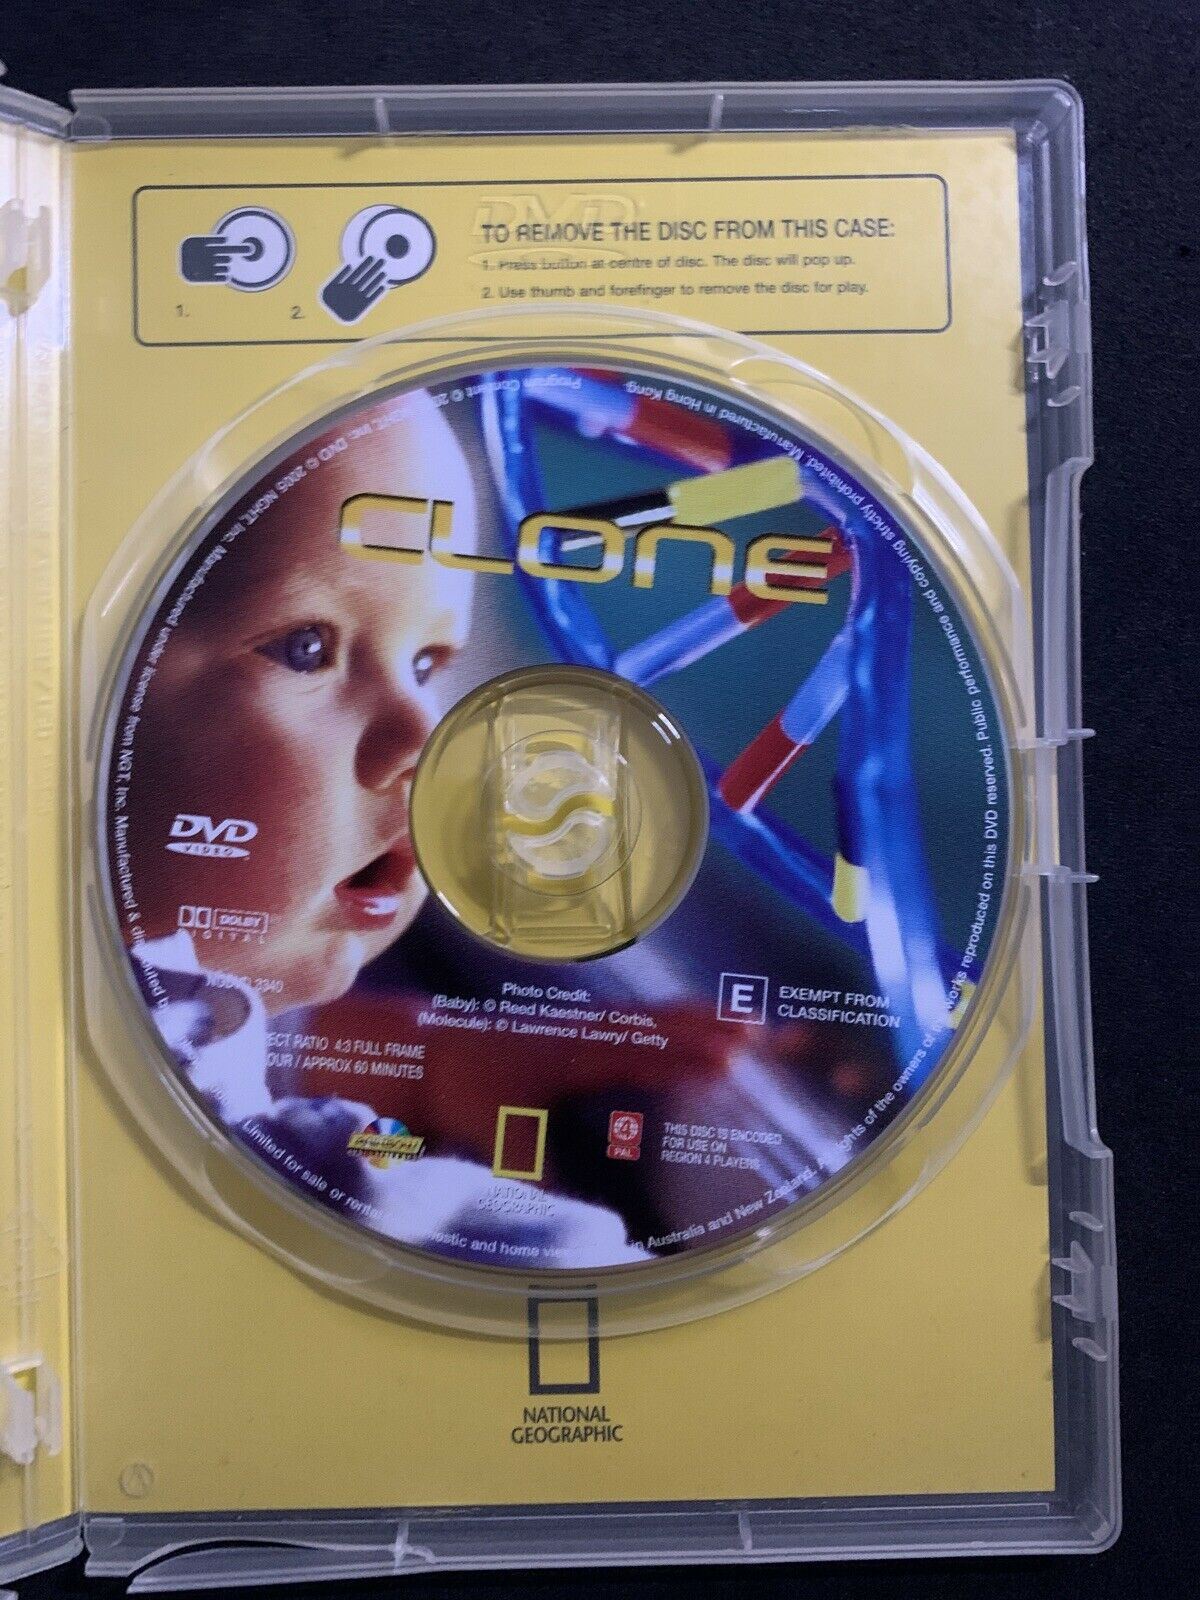 National Geographic - Clone (DVD, 2006) + Special Features!